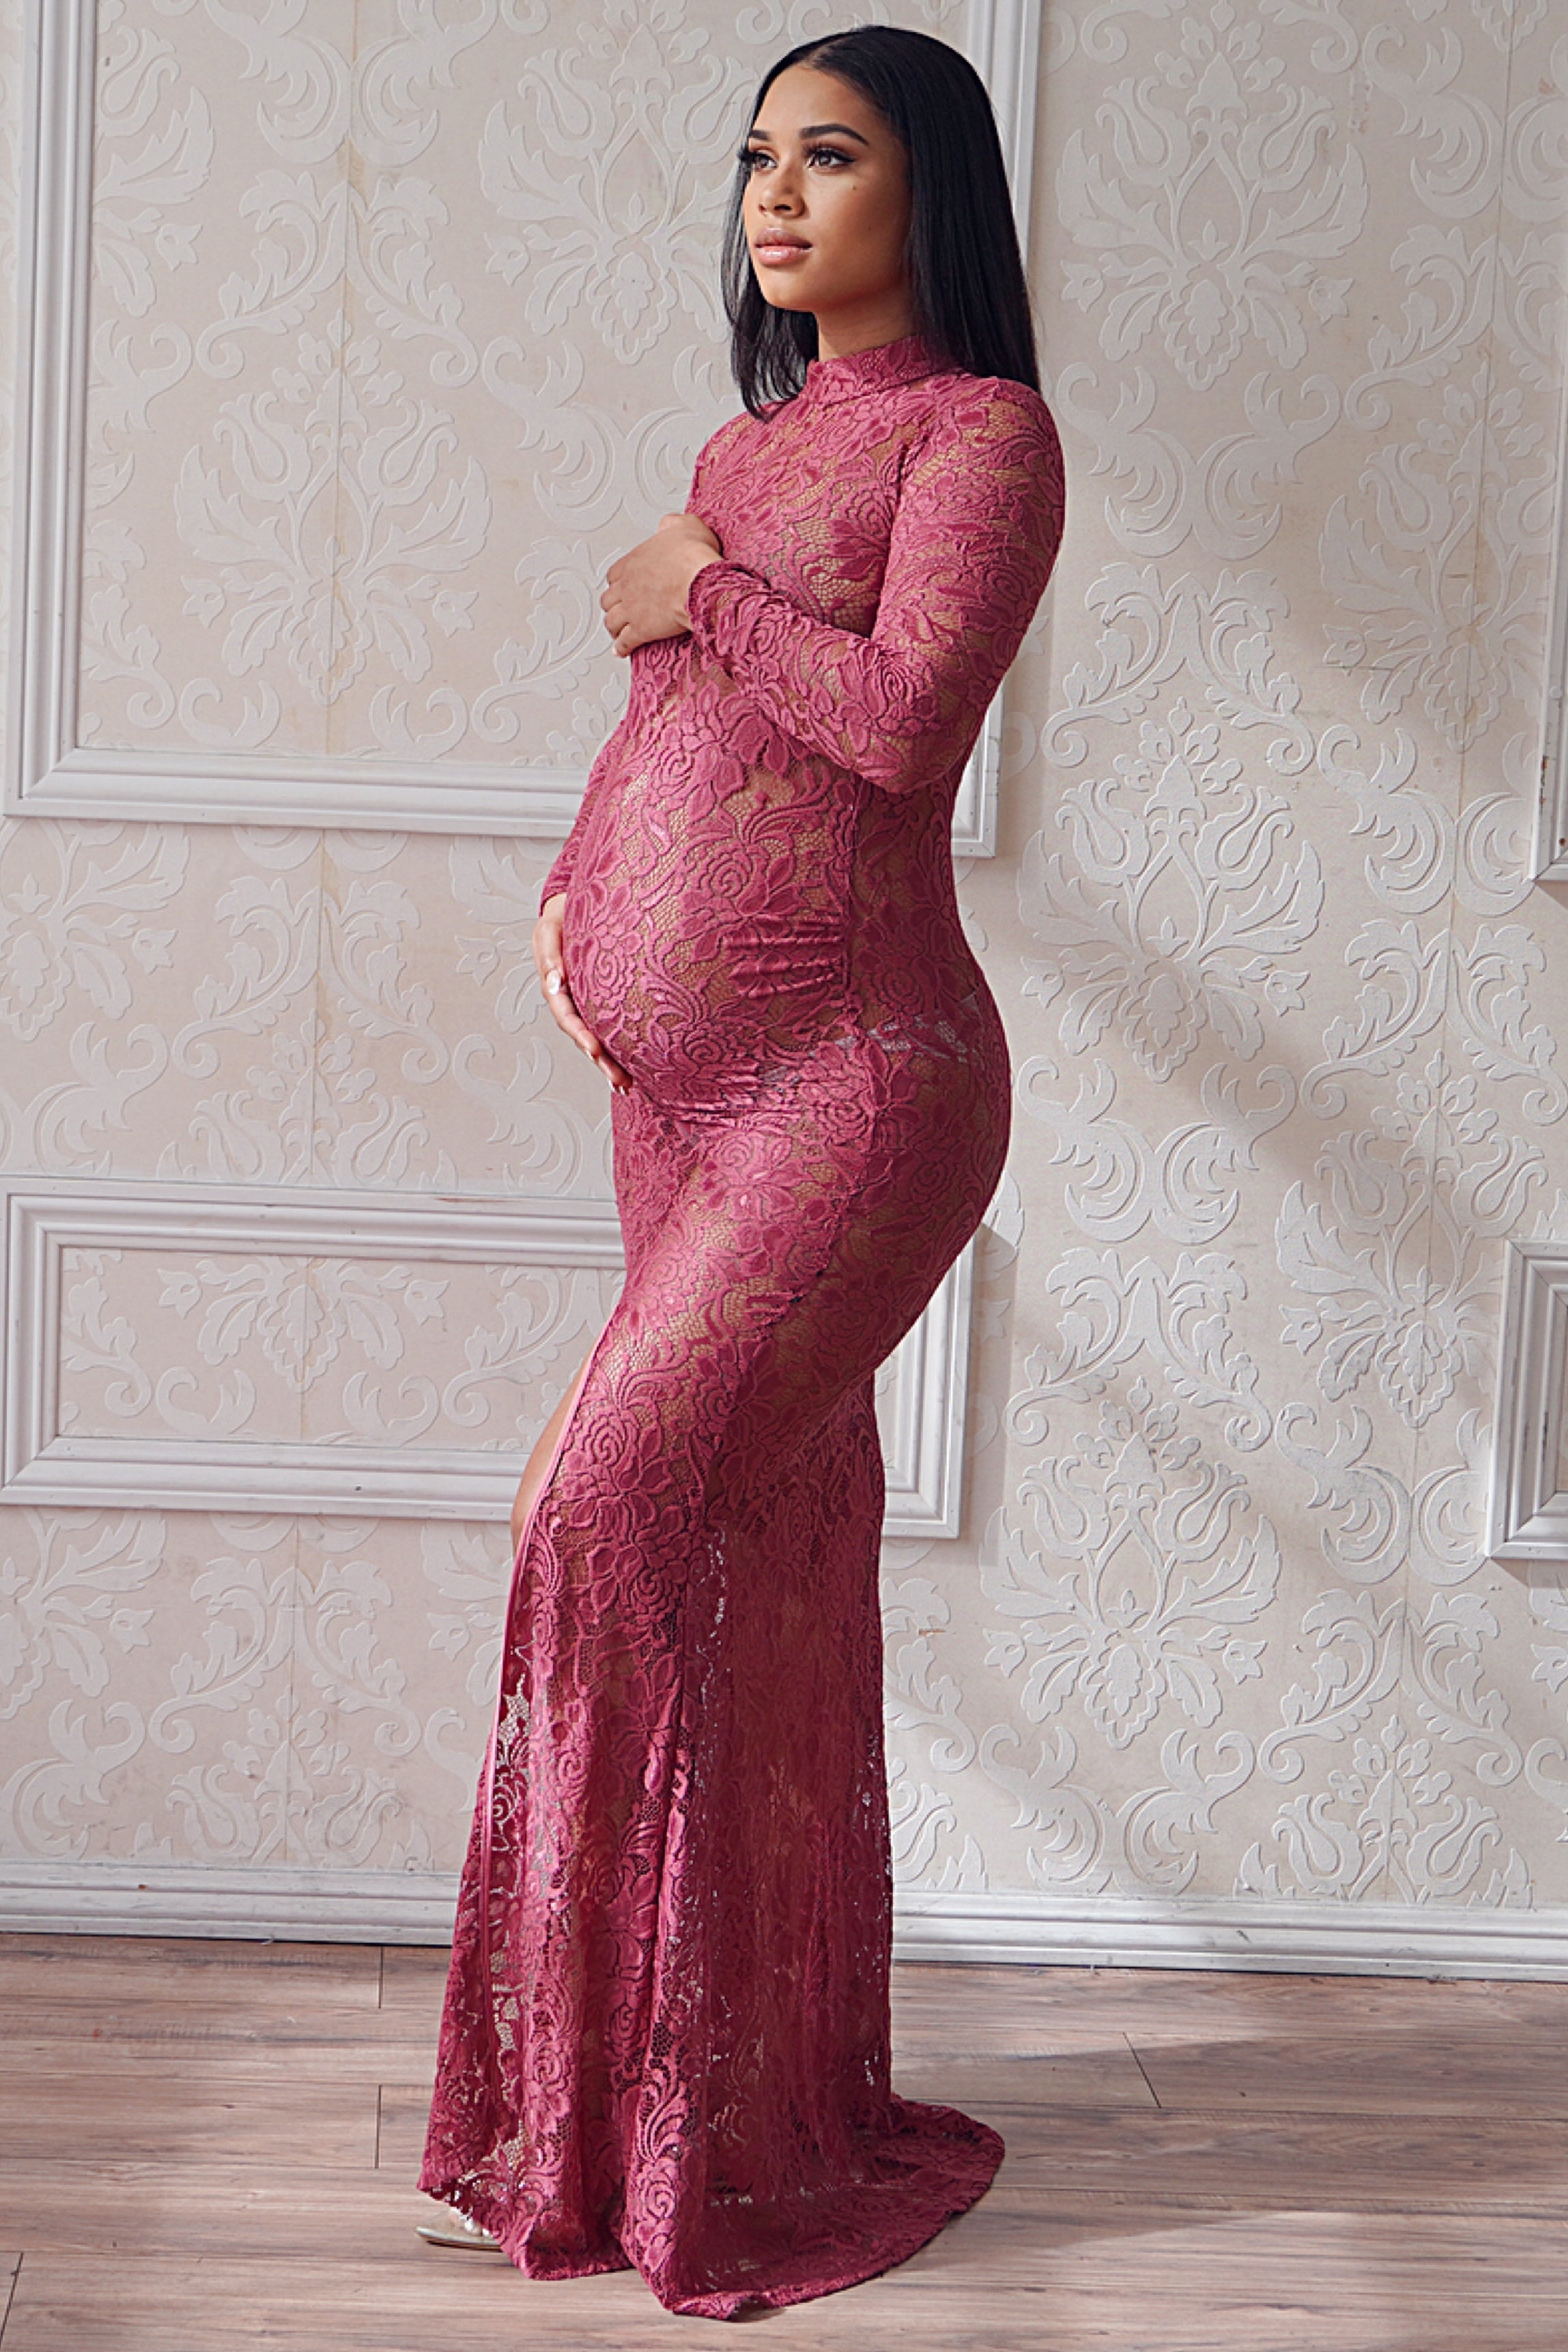 Pink Strapless Lace Maternity Photoshoot Gown/Dress | Maternity dresses for  photoshoot, Lace maternity dress, Lace maternity gown